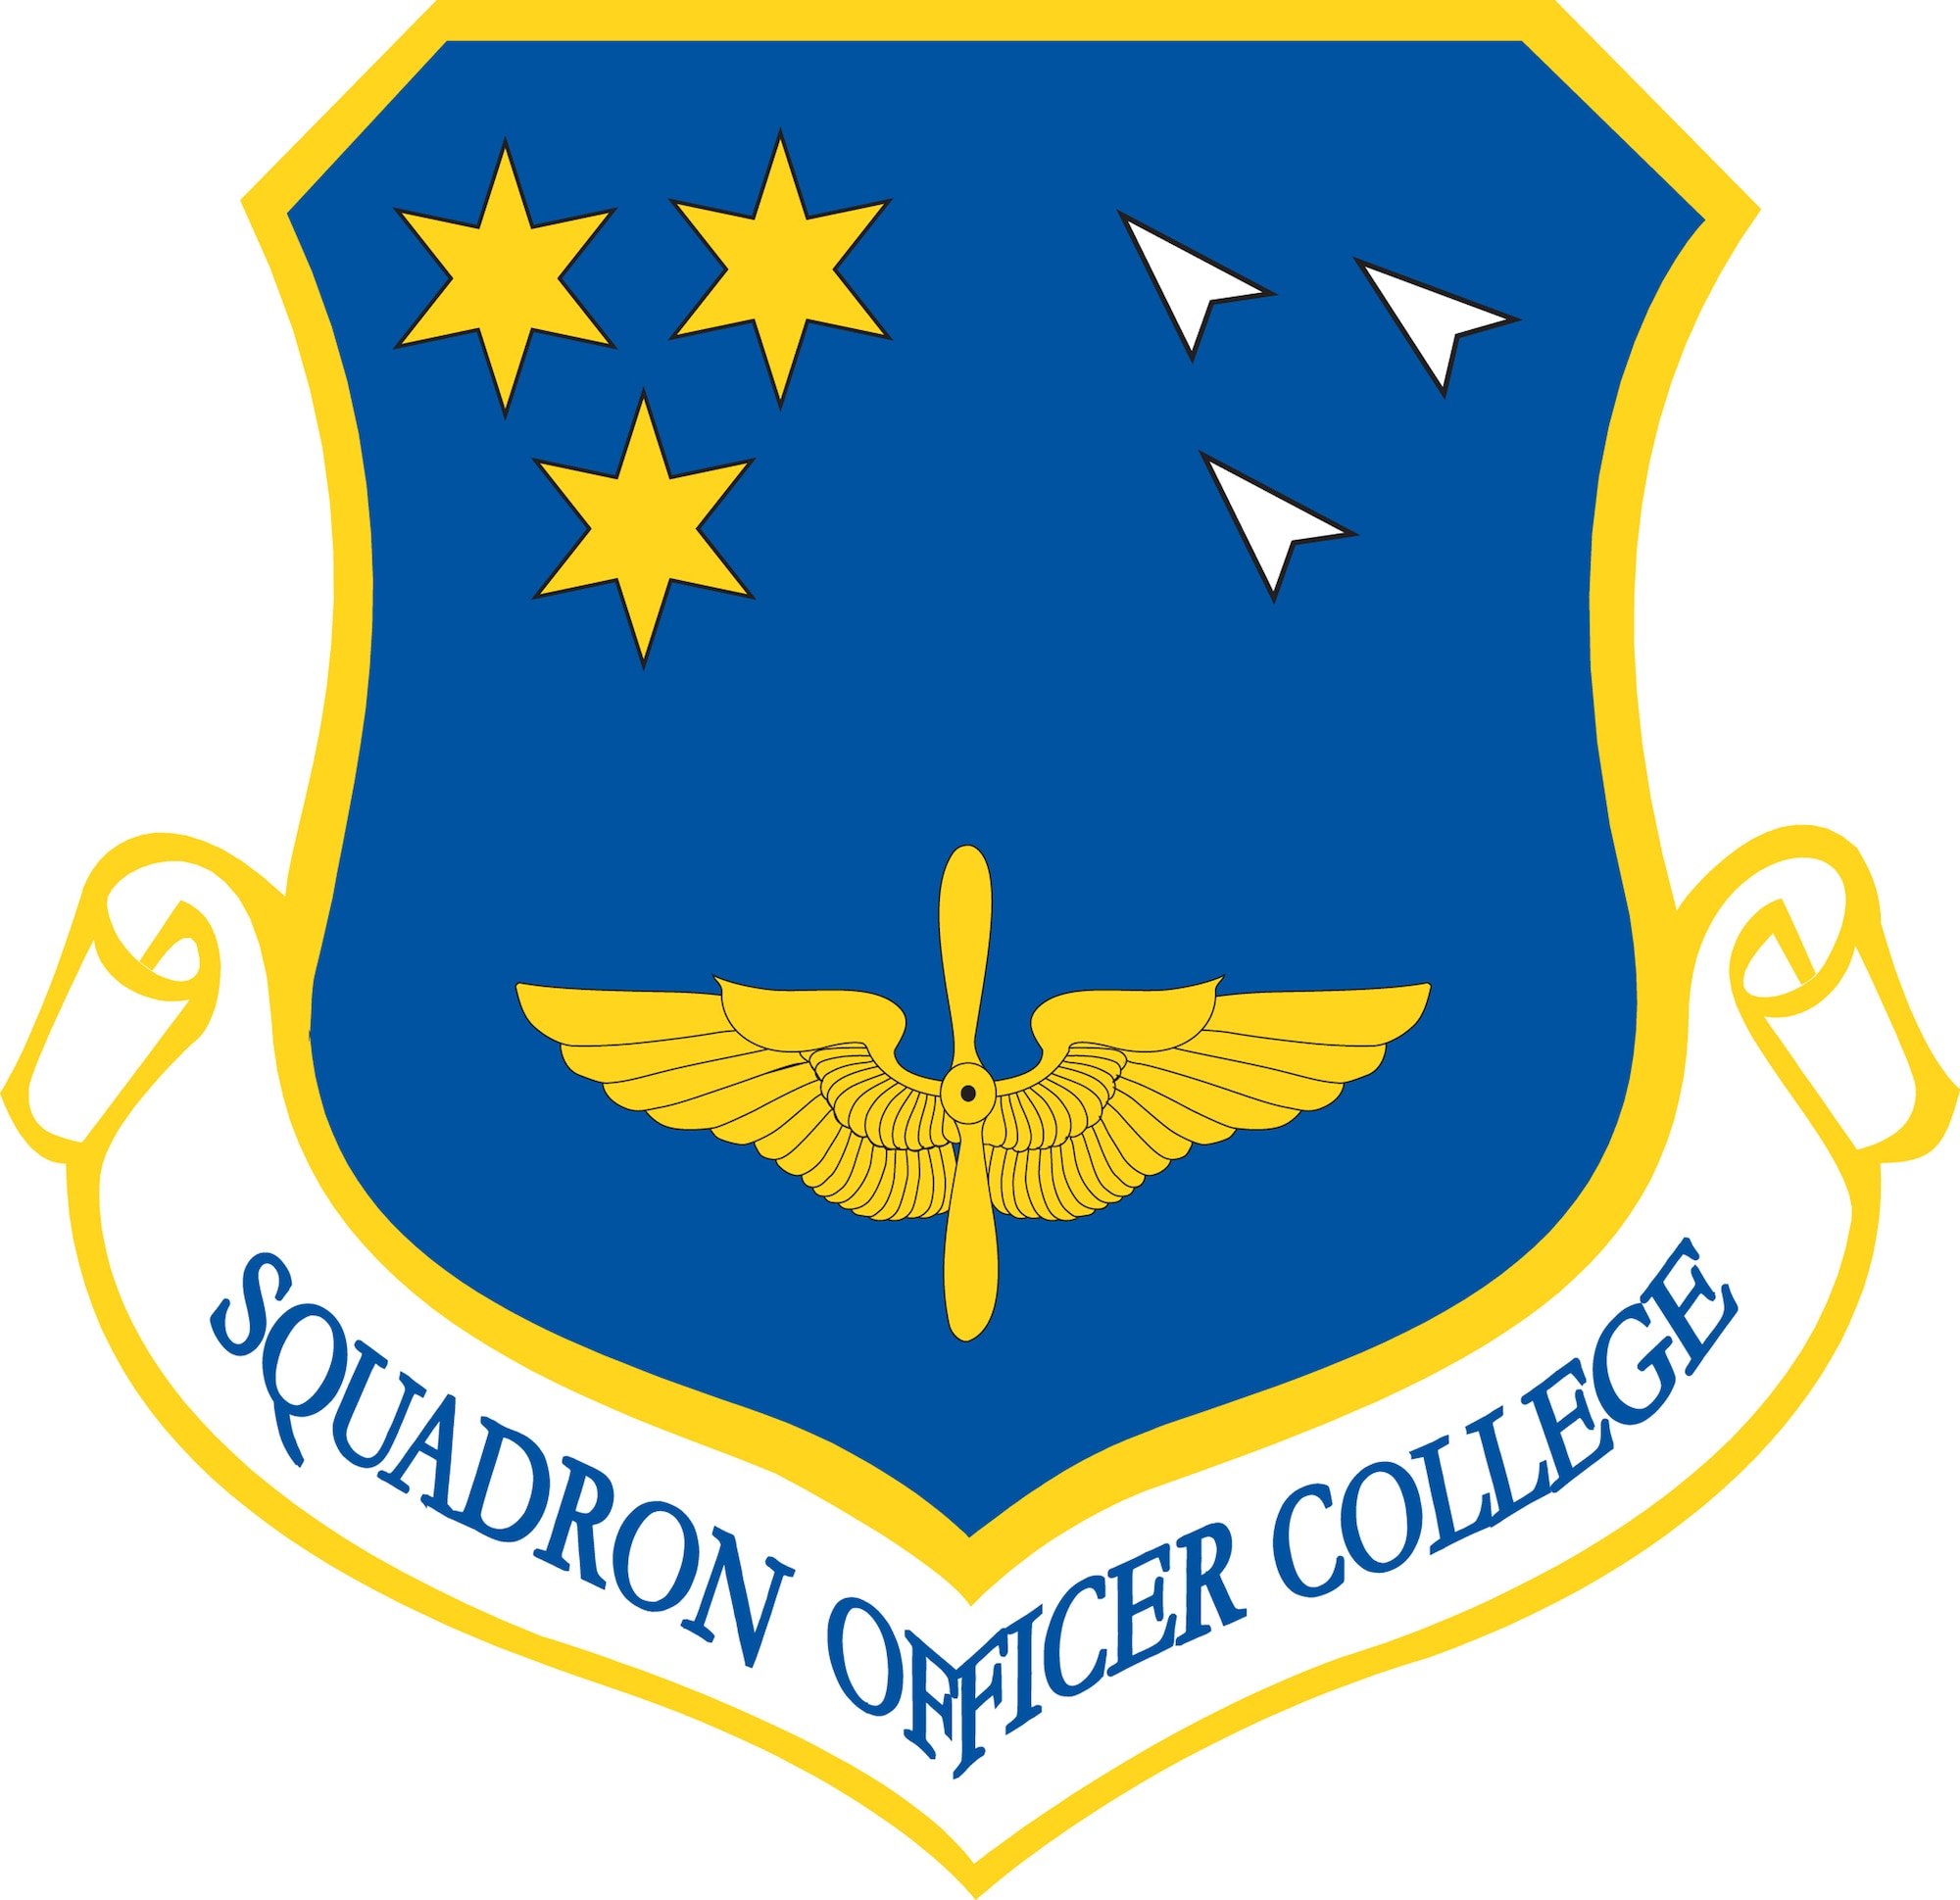 Squadron Officer College